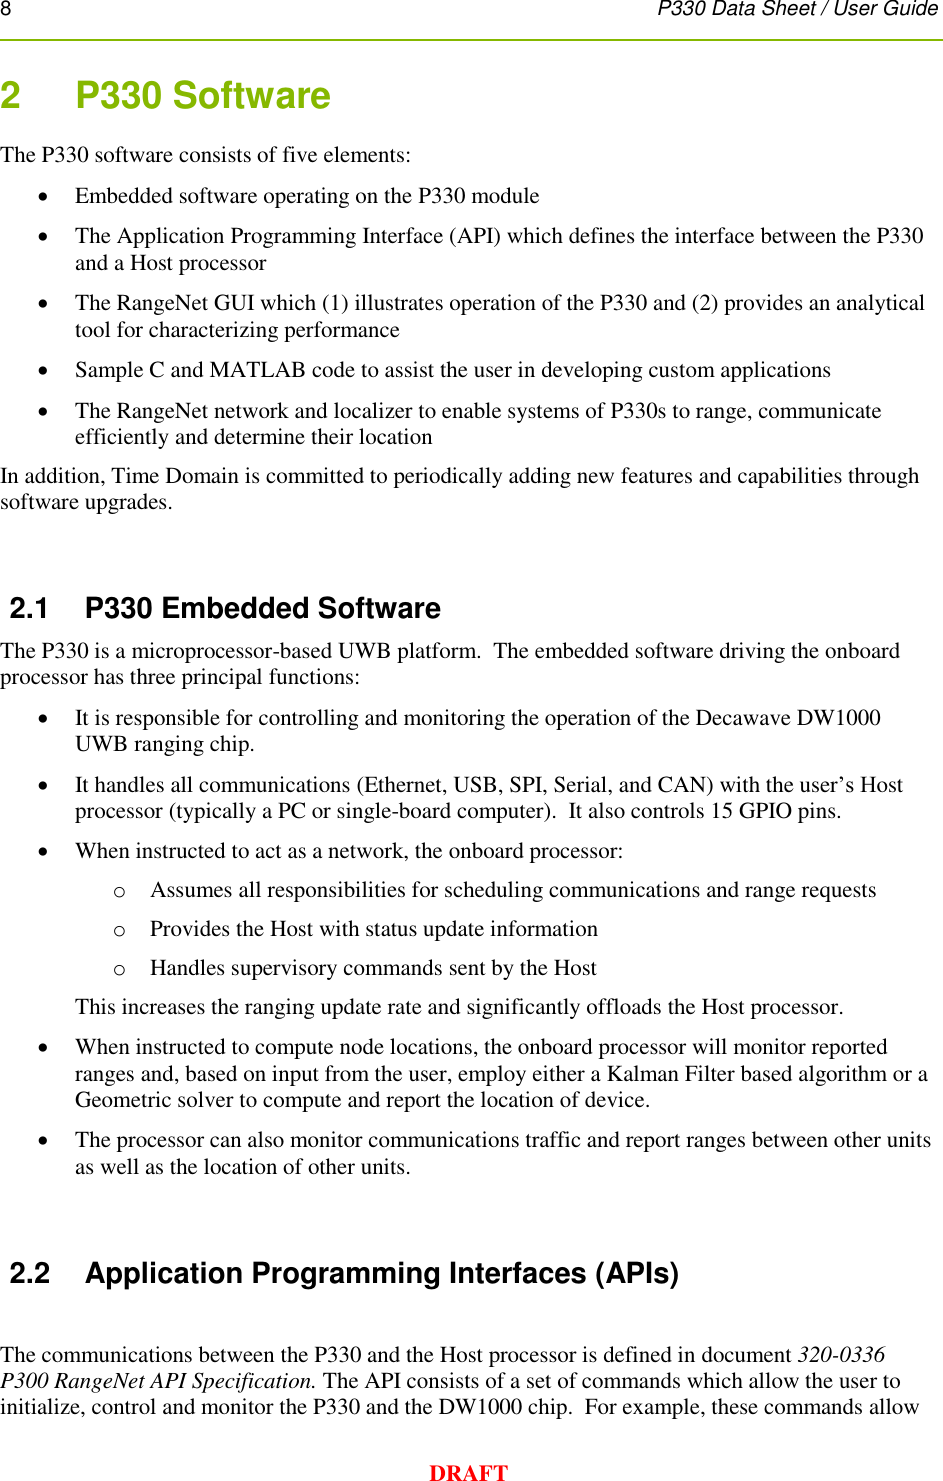 8      P330 Data Sheet / User Guide  DRAFT 2    P330 Software  The P330 software consists of five elements:  Embedded software operating on the P330 module  The Application Programming Interface (API) which defines the interface between the P330 and a Host processor  The RangeNet GUI which (1) illustrates operation of the P330 and (2) provides an analytical tool for characterizing performance  Sample C and MATLAB code to assist the user in developing custom applications  The RangeNet network and localizer to enable systems of P330s to range, communicate efficiently and determine their location In addition, Time Domain is committed to periodically adding new features and capabilities through software upgrades.  2.1  P330 Embedded Software The P330 is a microprocessor-based UWB platform.  The embedded software driving the onboard processor has three principal functions:   It is responsible for controlling and monitoring the operation of the Decawave DW1000 UWB ranging chip.  It handles all communications (Ethernet, USB, SPI, Serial, and CAN) with the user’s Host processor (typically a PC or single-board computer).  It also controls 15 GPIO pins.  When instructed to act as a network, the onboard processor:  o Assumes all responsibilities for scheduling communications and range requests o Provides the Host with status update information  o Handles supervisory commands sent by the Host This increases the ranging update rate and significantly offloads the Host processor.  When instructed to compute node locations, the onboard processor will monitor reported ranges and, based on input from the user, employ either a Kalman Filter based algorithm or a Geometric solver to compute and report the location of device.  The processor can also monitor communications traffic and report ranges between other units as well as the location of other units.  2.2  Application Programming Interfaces (APIs)  The communications between the P330 and the Host processor is defined in document 320-0336 P300 RangeNet API Specification. The API consists of a set of commands which allow the user to initialize, control and monitor the P330 and the DW1000 chip.  For example, these commands allow 